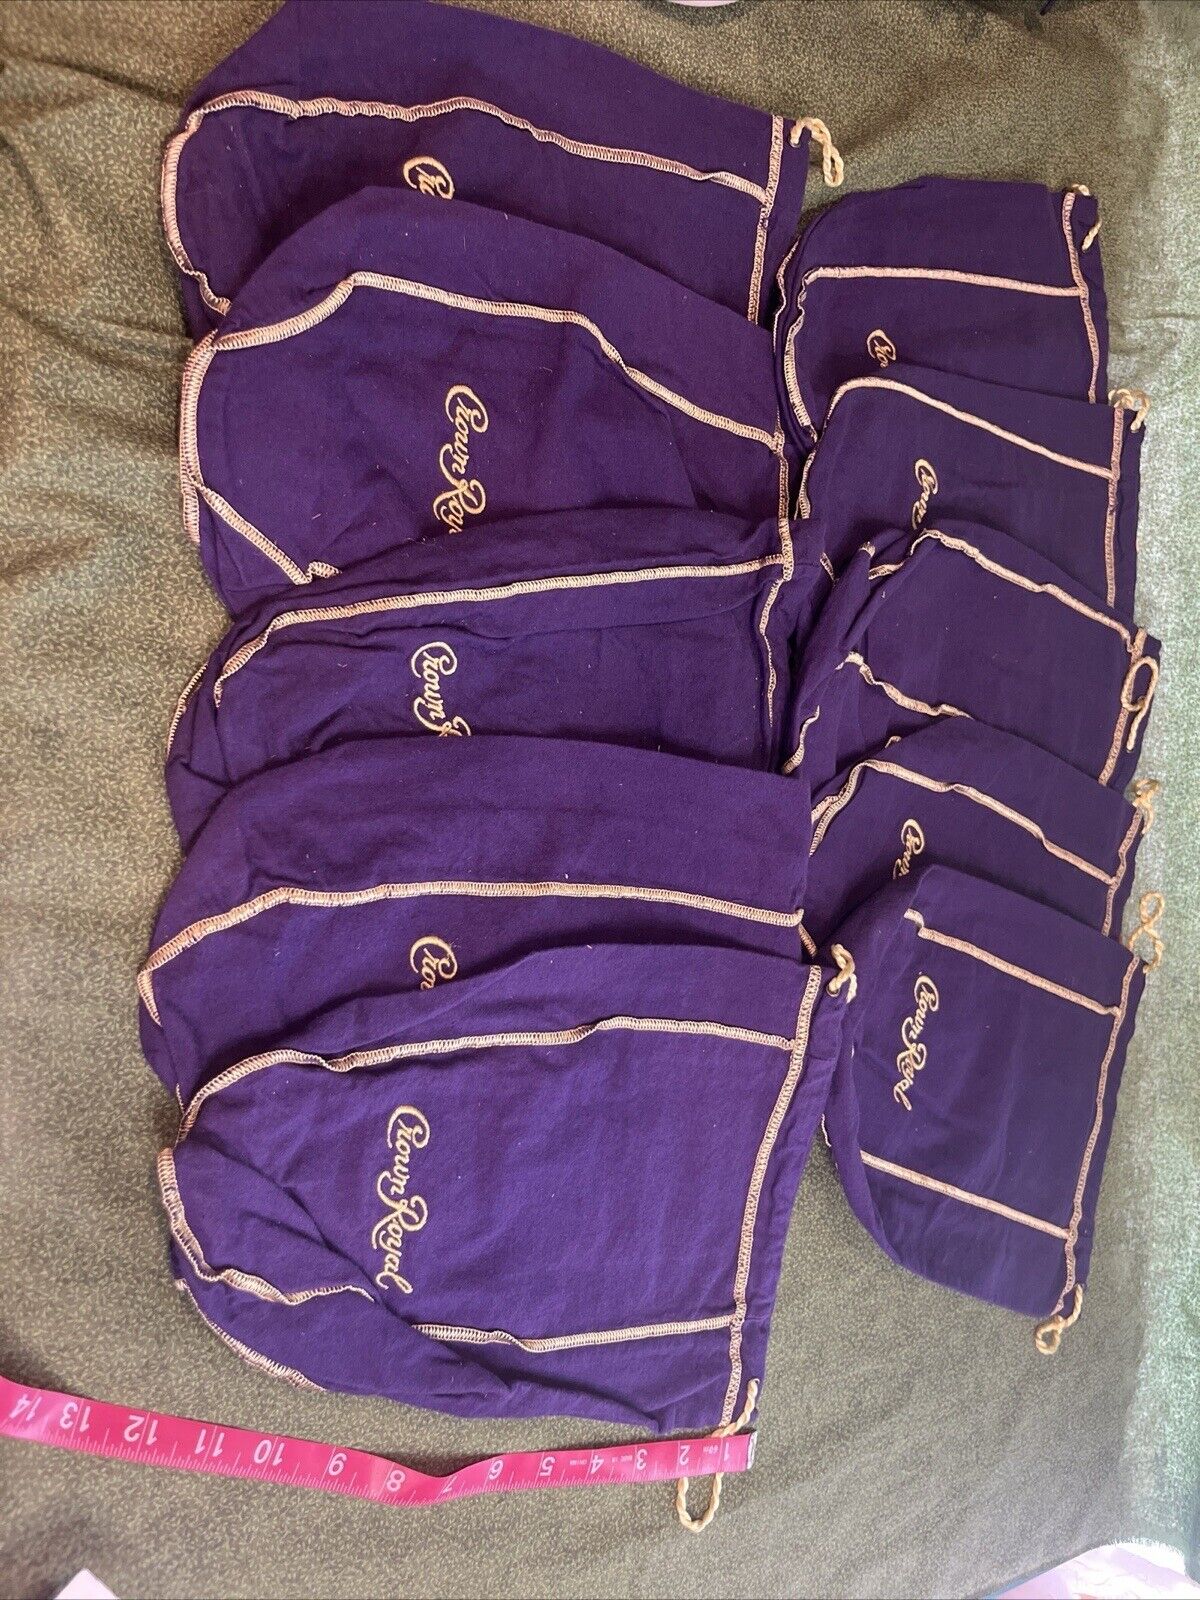 Crown Royal 1.75L XL Extra Large Purple & Gold Drawstring Bags 12 inch Set of 10